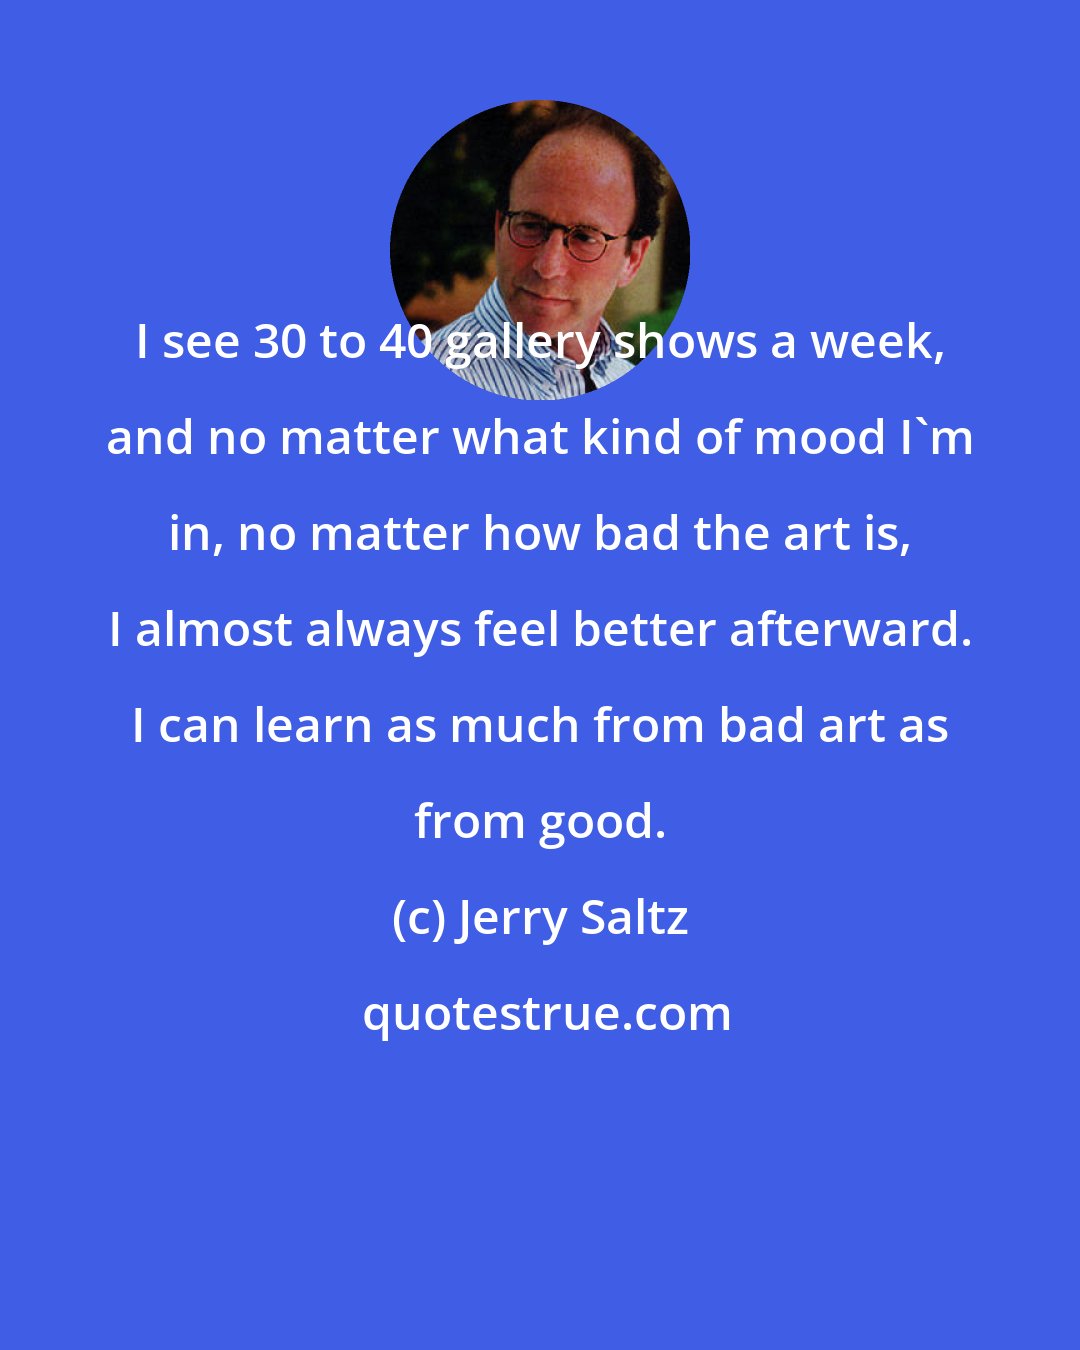 Jerry Saltz: I see 30 to 40 gallery shows a week, and no matter what kind of mood I'm in, no matter how bad the art is, I almost always feel better afterward. I can learn as much from bad art as from good.